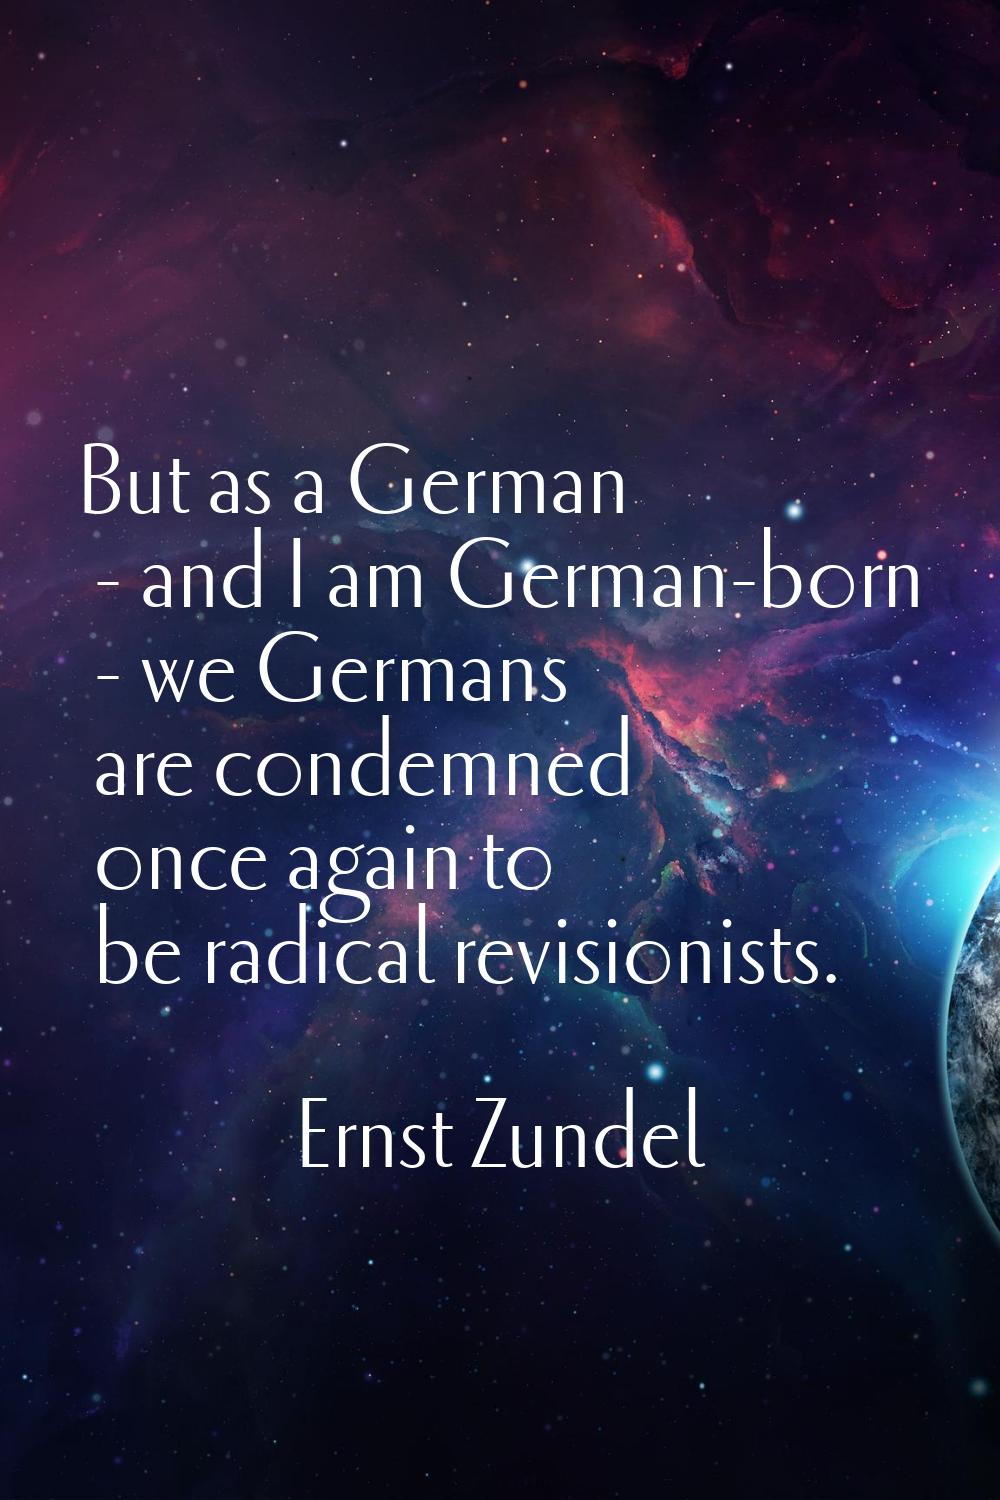 But as a German - and I am German-born - we Germans are condemned once again to be radical revision